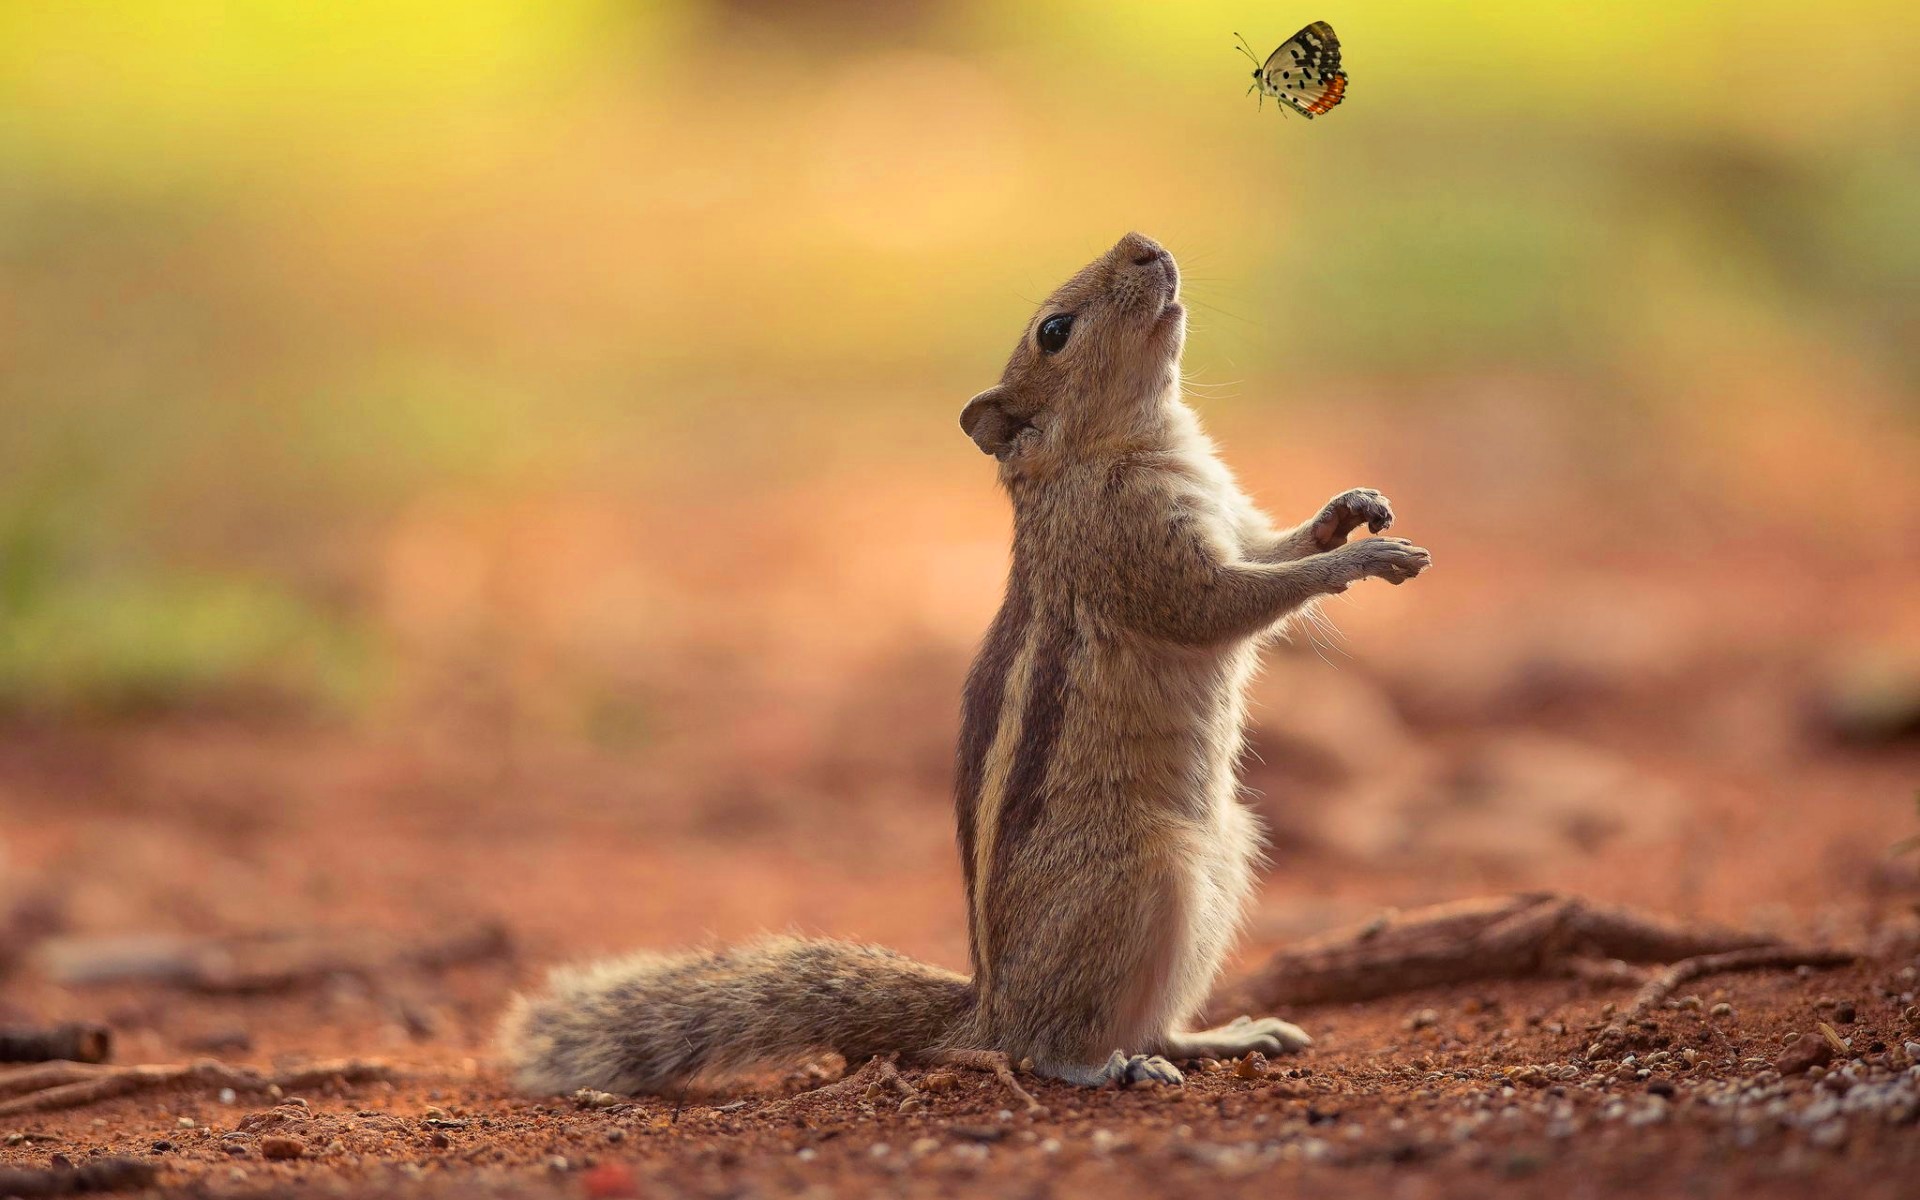 Squirrel Watching Butterfly Wallpapers - 1920x1200 - 330896